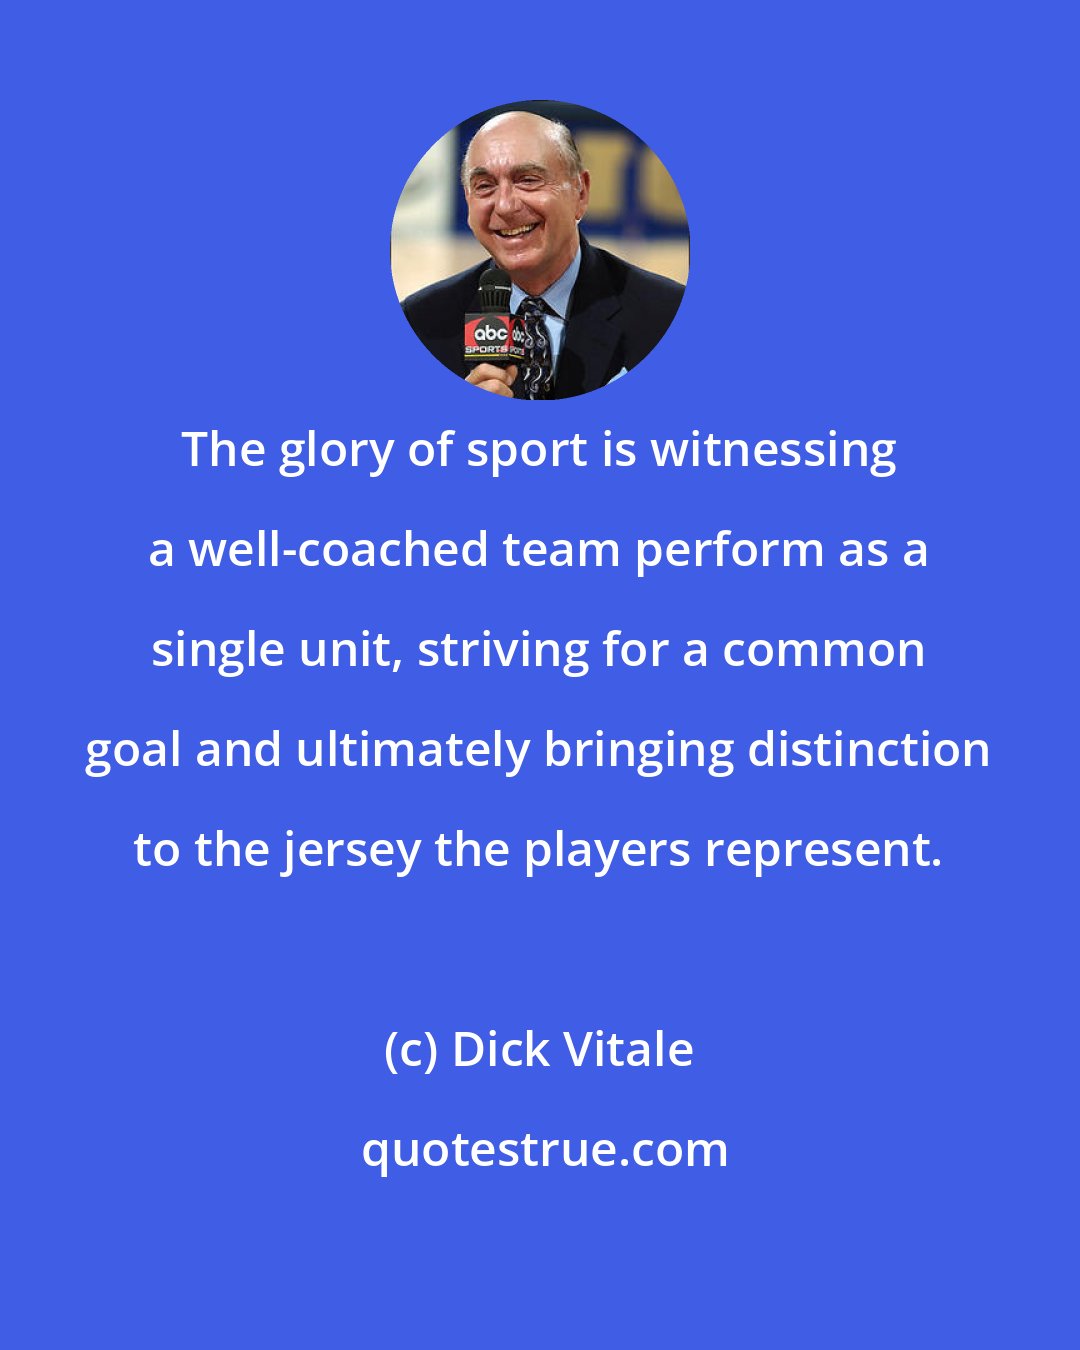 Dick Vitale: The glory of sport is witnessing a well-coached team perform as a single unit, striving for a common goal and ultimately bringing distinction to the jersey the players represent.